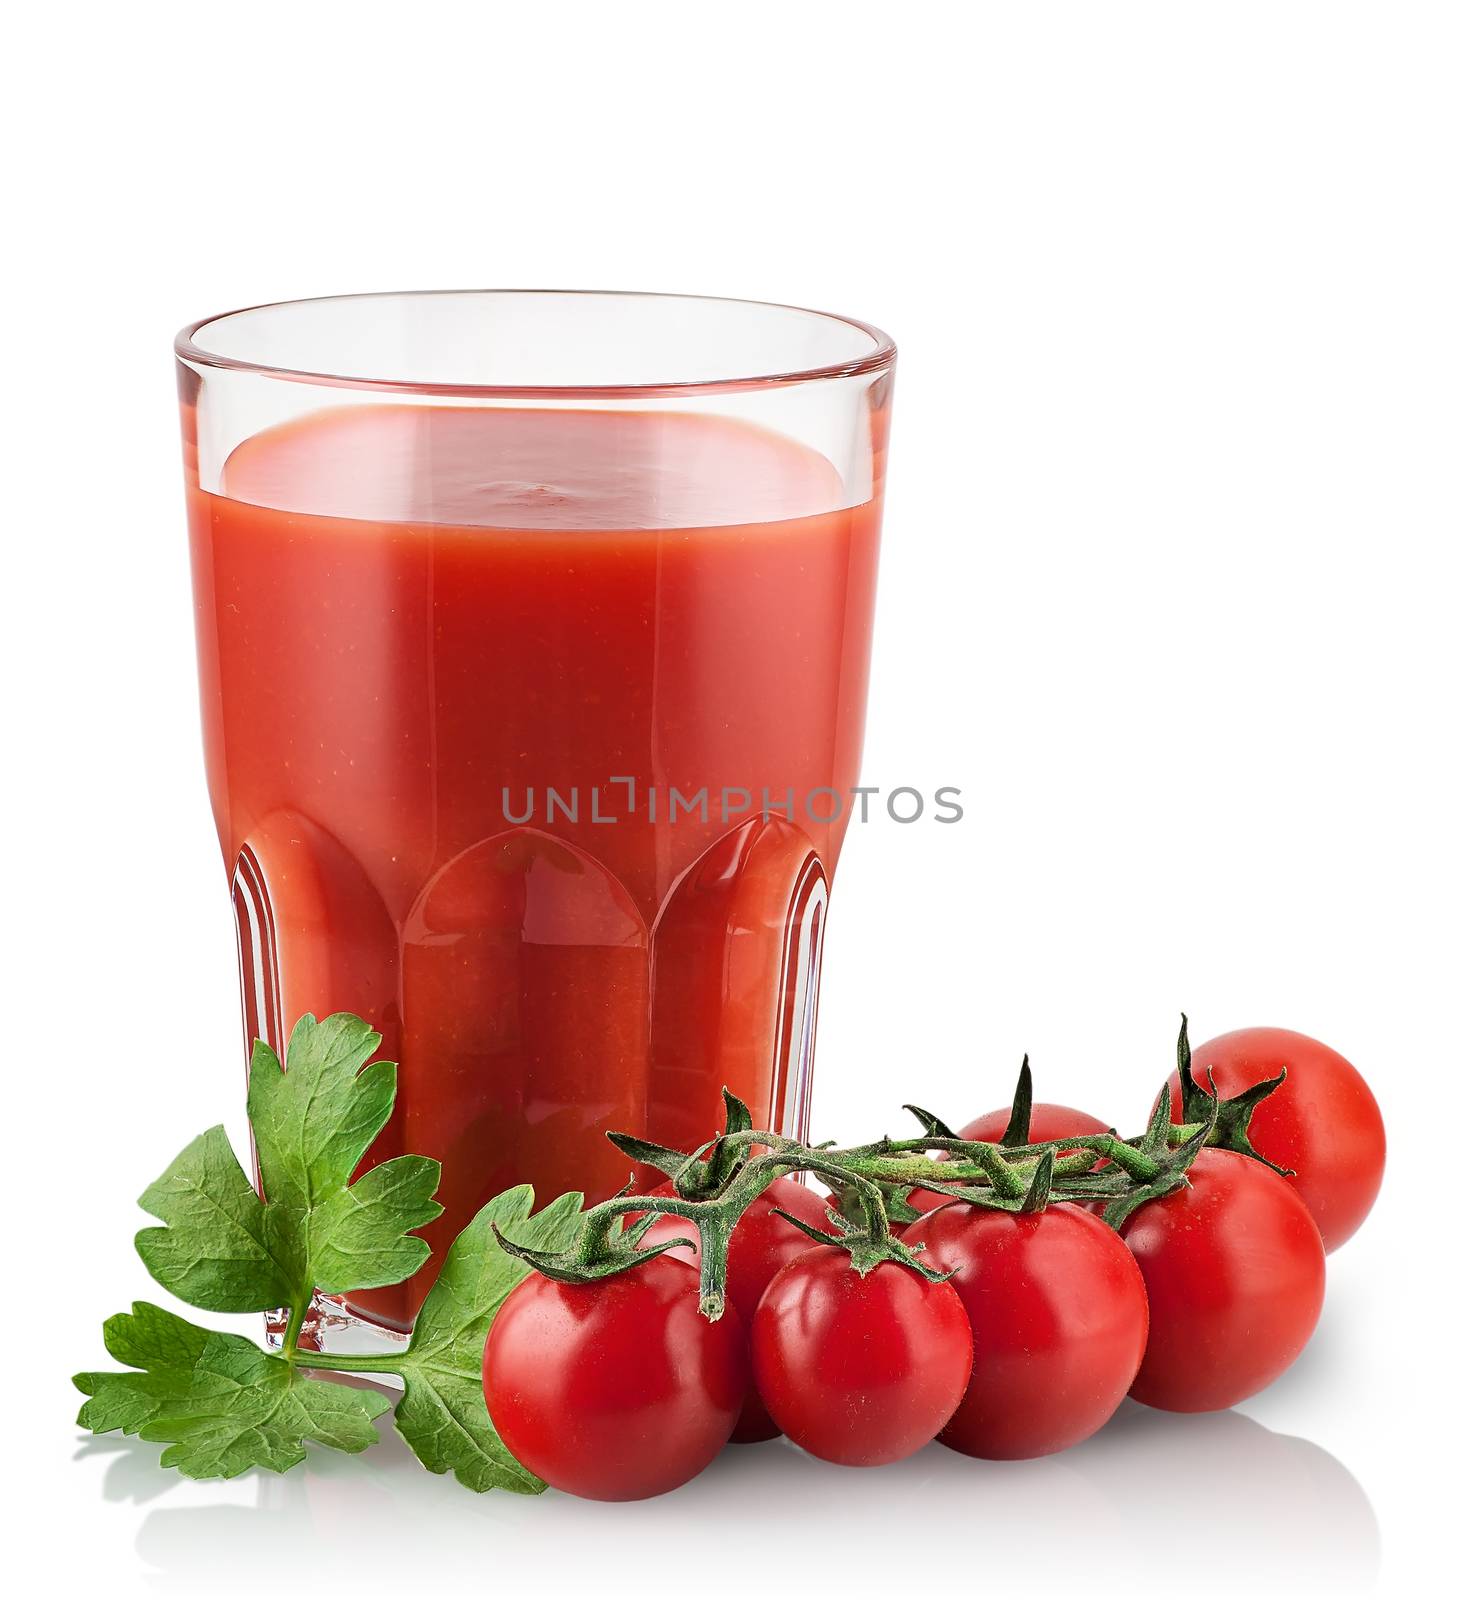 Cherry tomatoes with tomato juice. Isolated on white background.